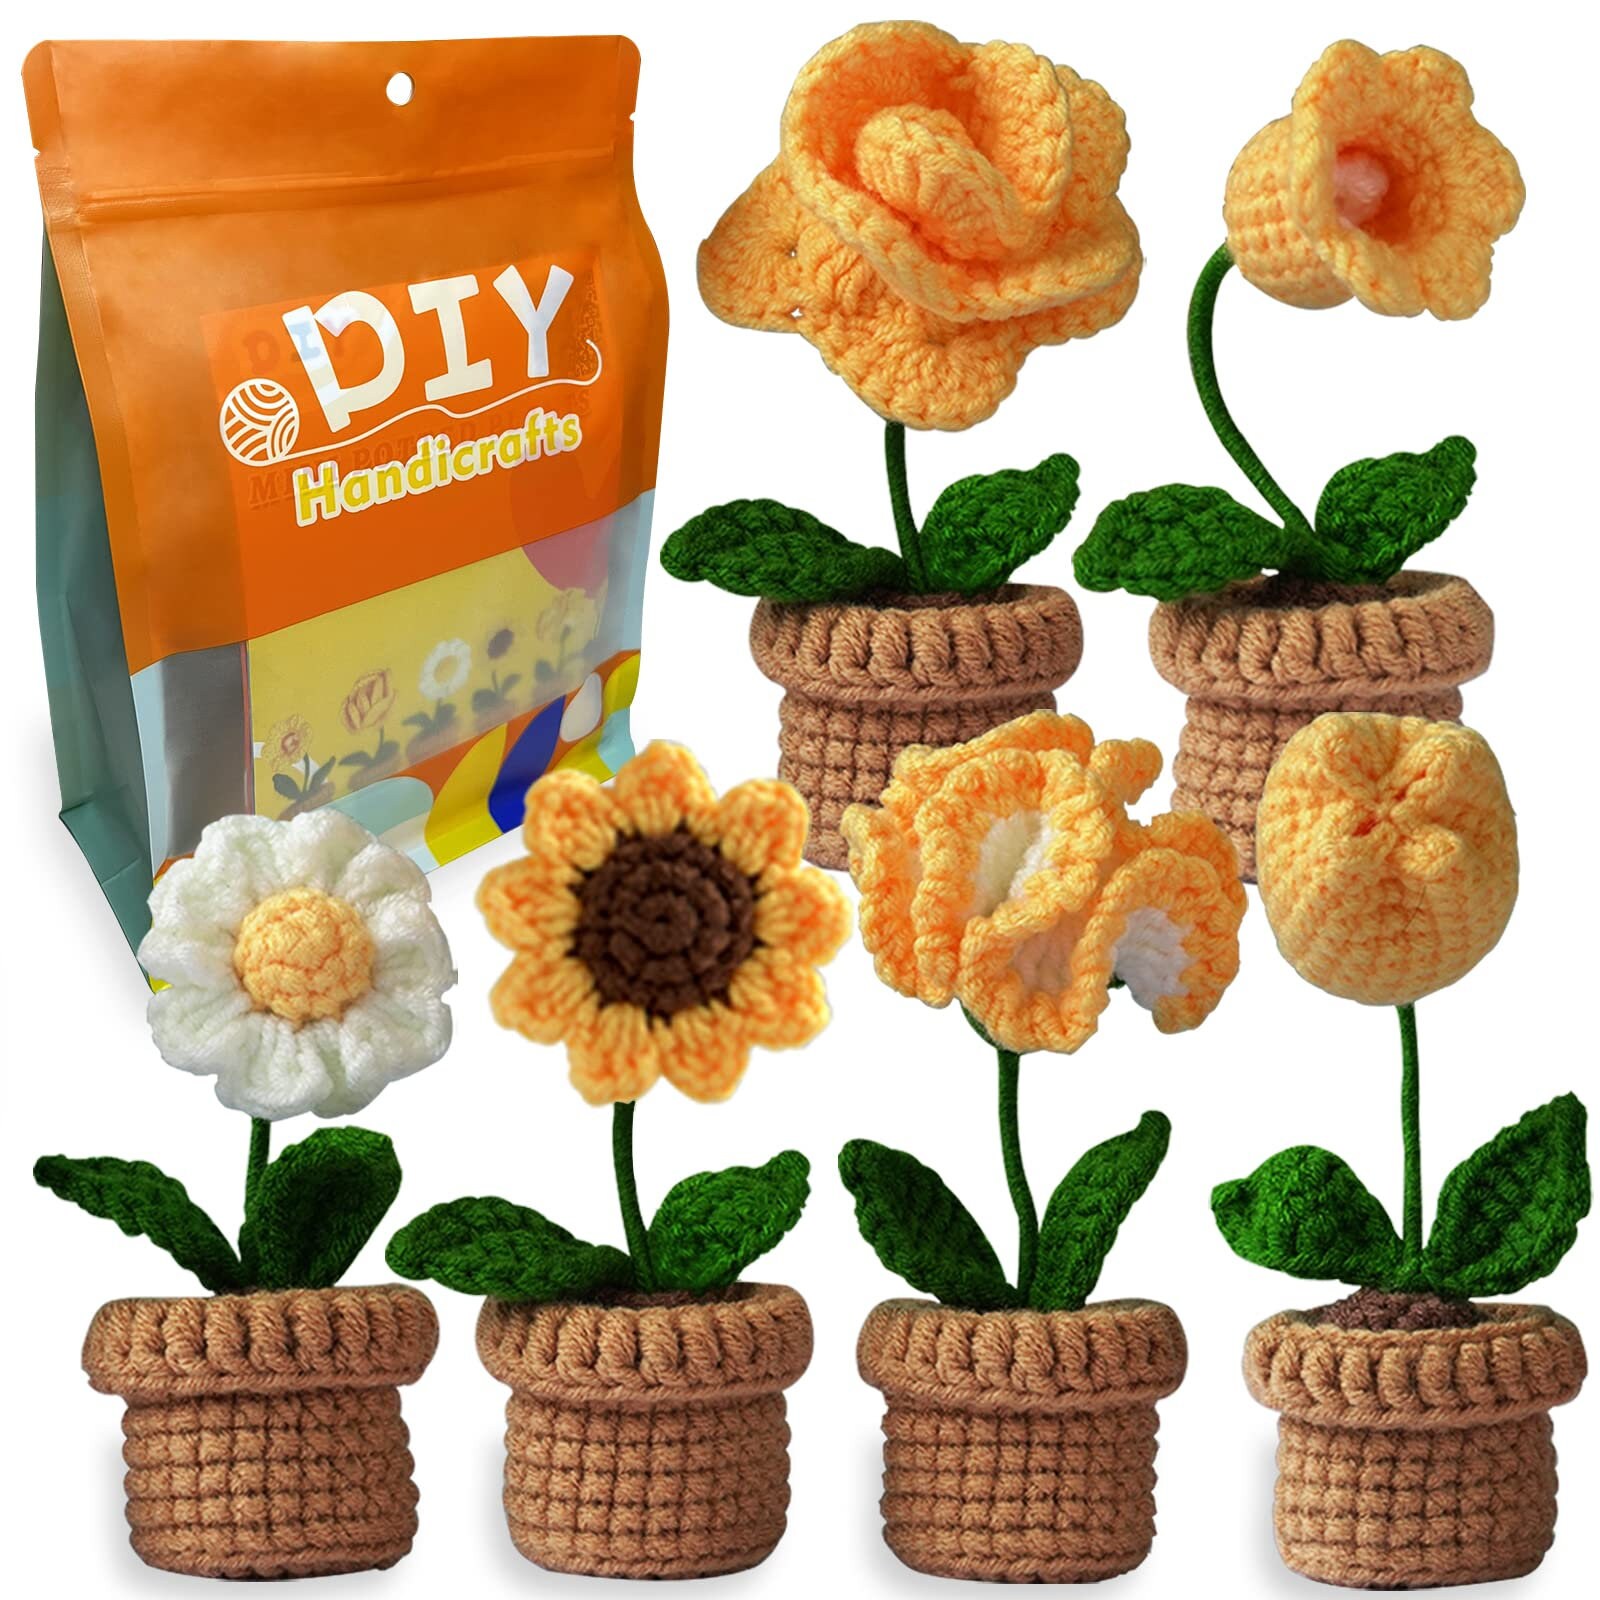  Qunland New Crochet Kit for Beginners, 6 Pcs Potted